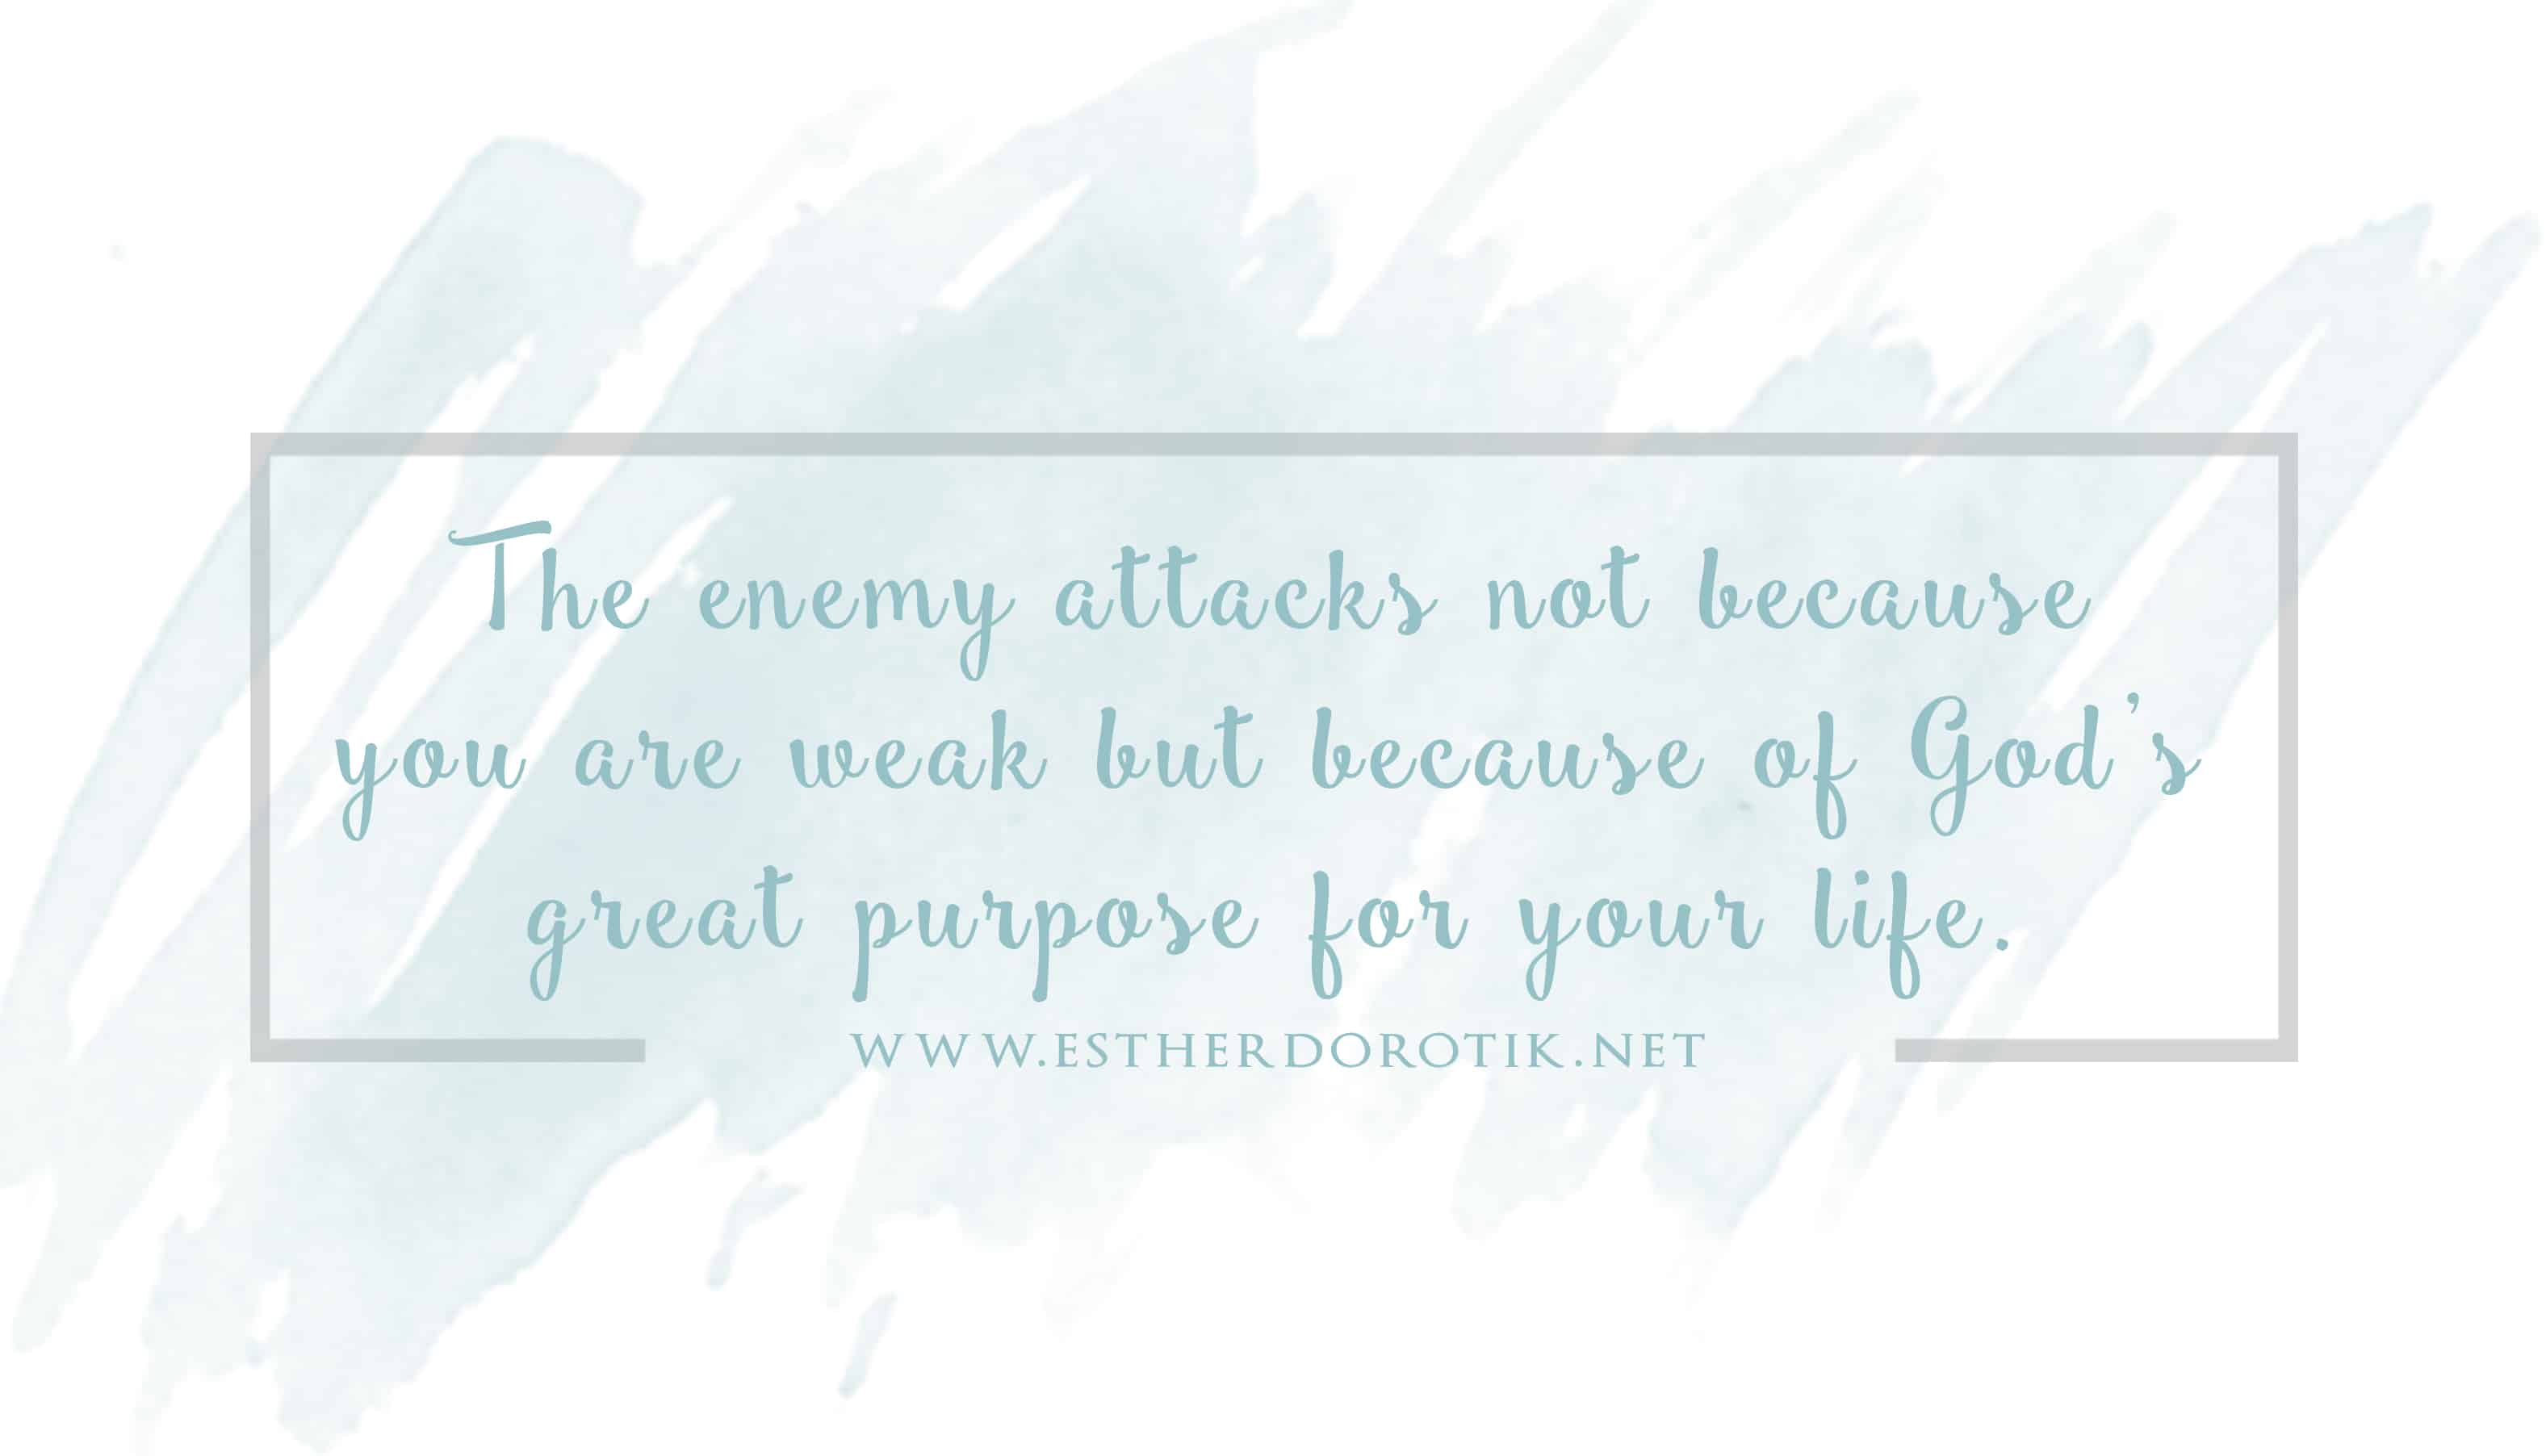 God's-purpose-for-your-life-is-the-first-thing-the-enemy-attacks, God has a great plan for you, if the enemy can't steal your eternity he'll steal your destiny